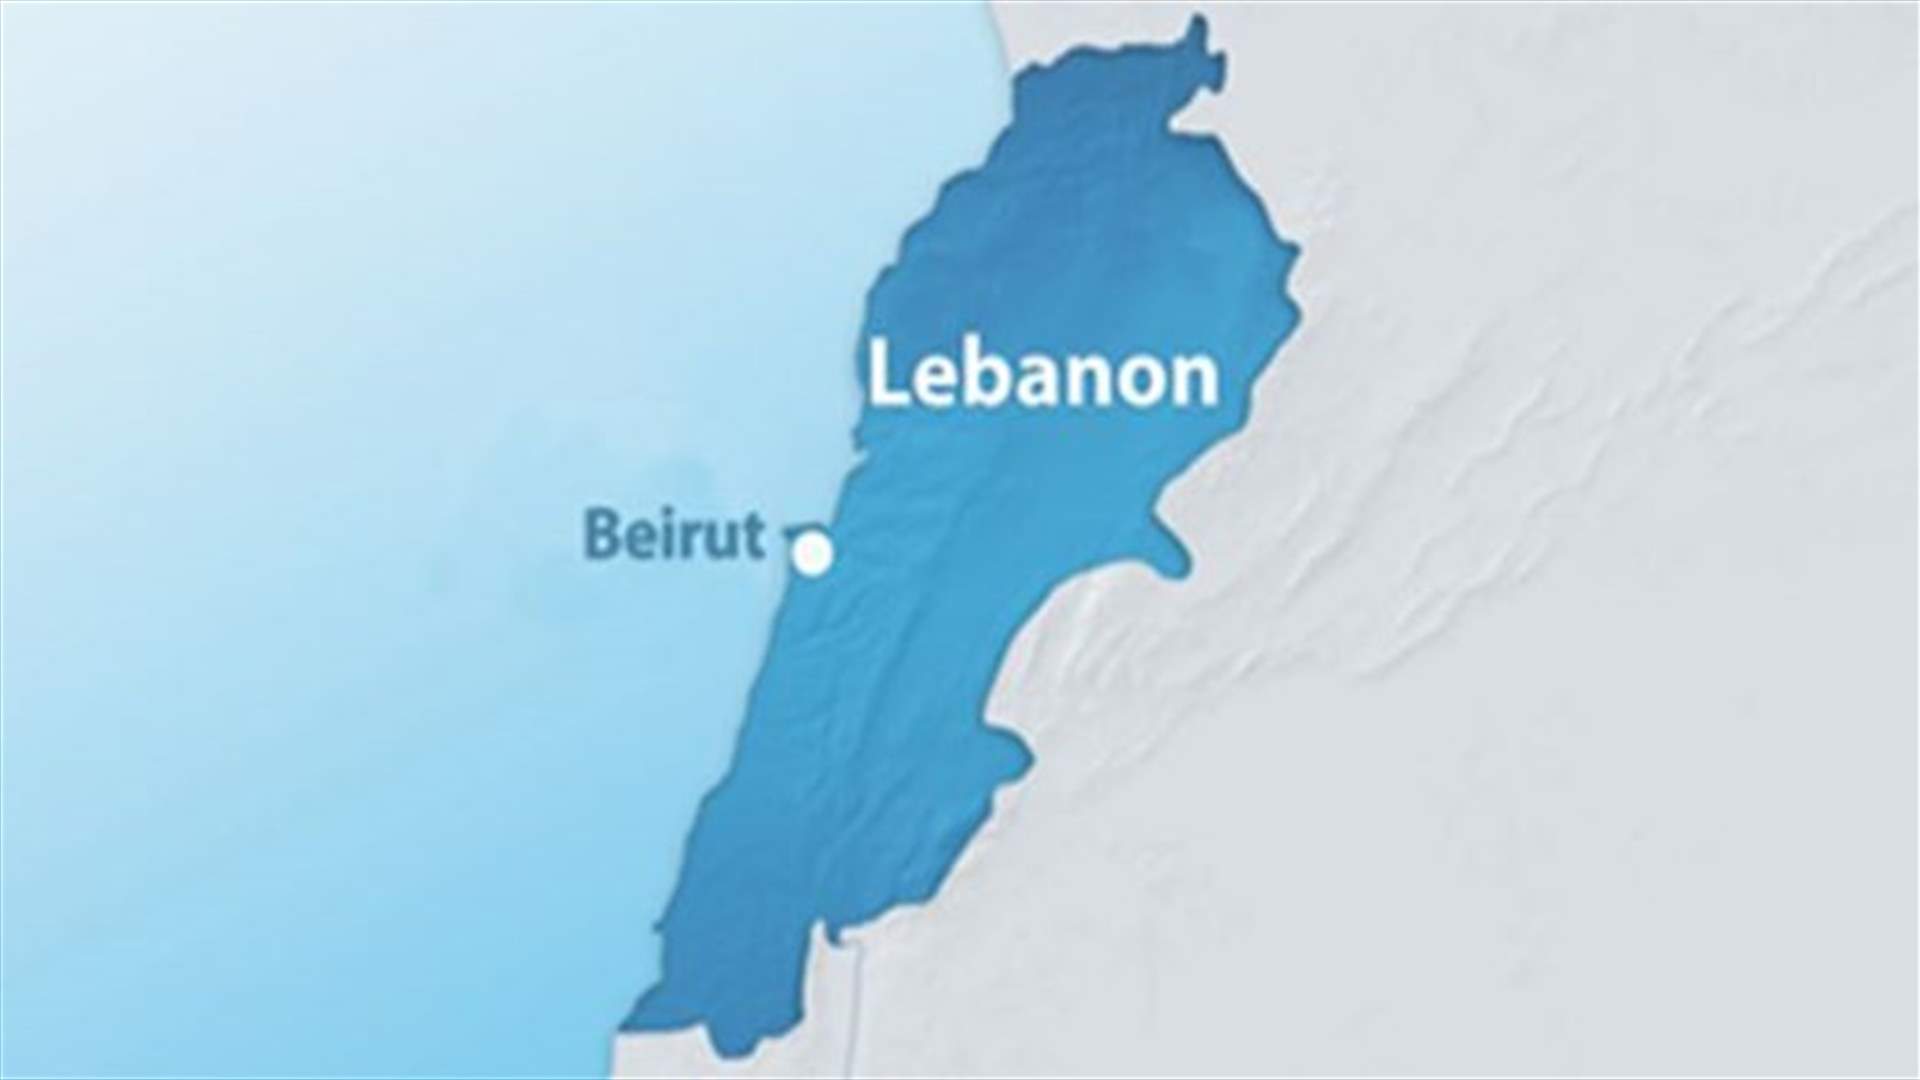 Lebanese national killed after he forcefully tried to enter polling station